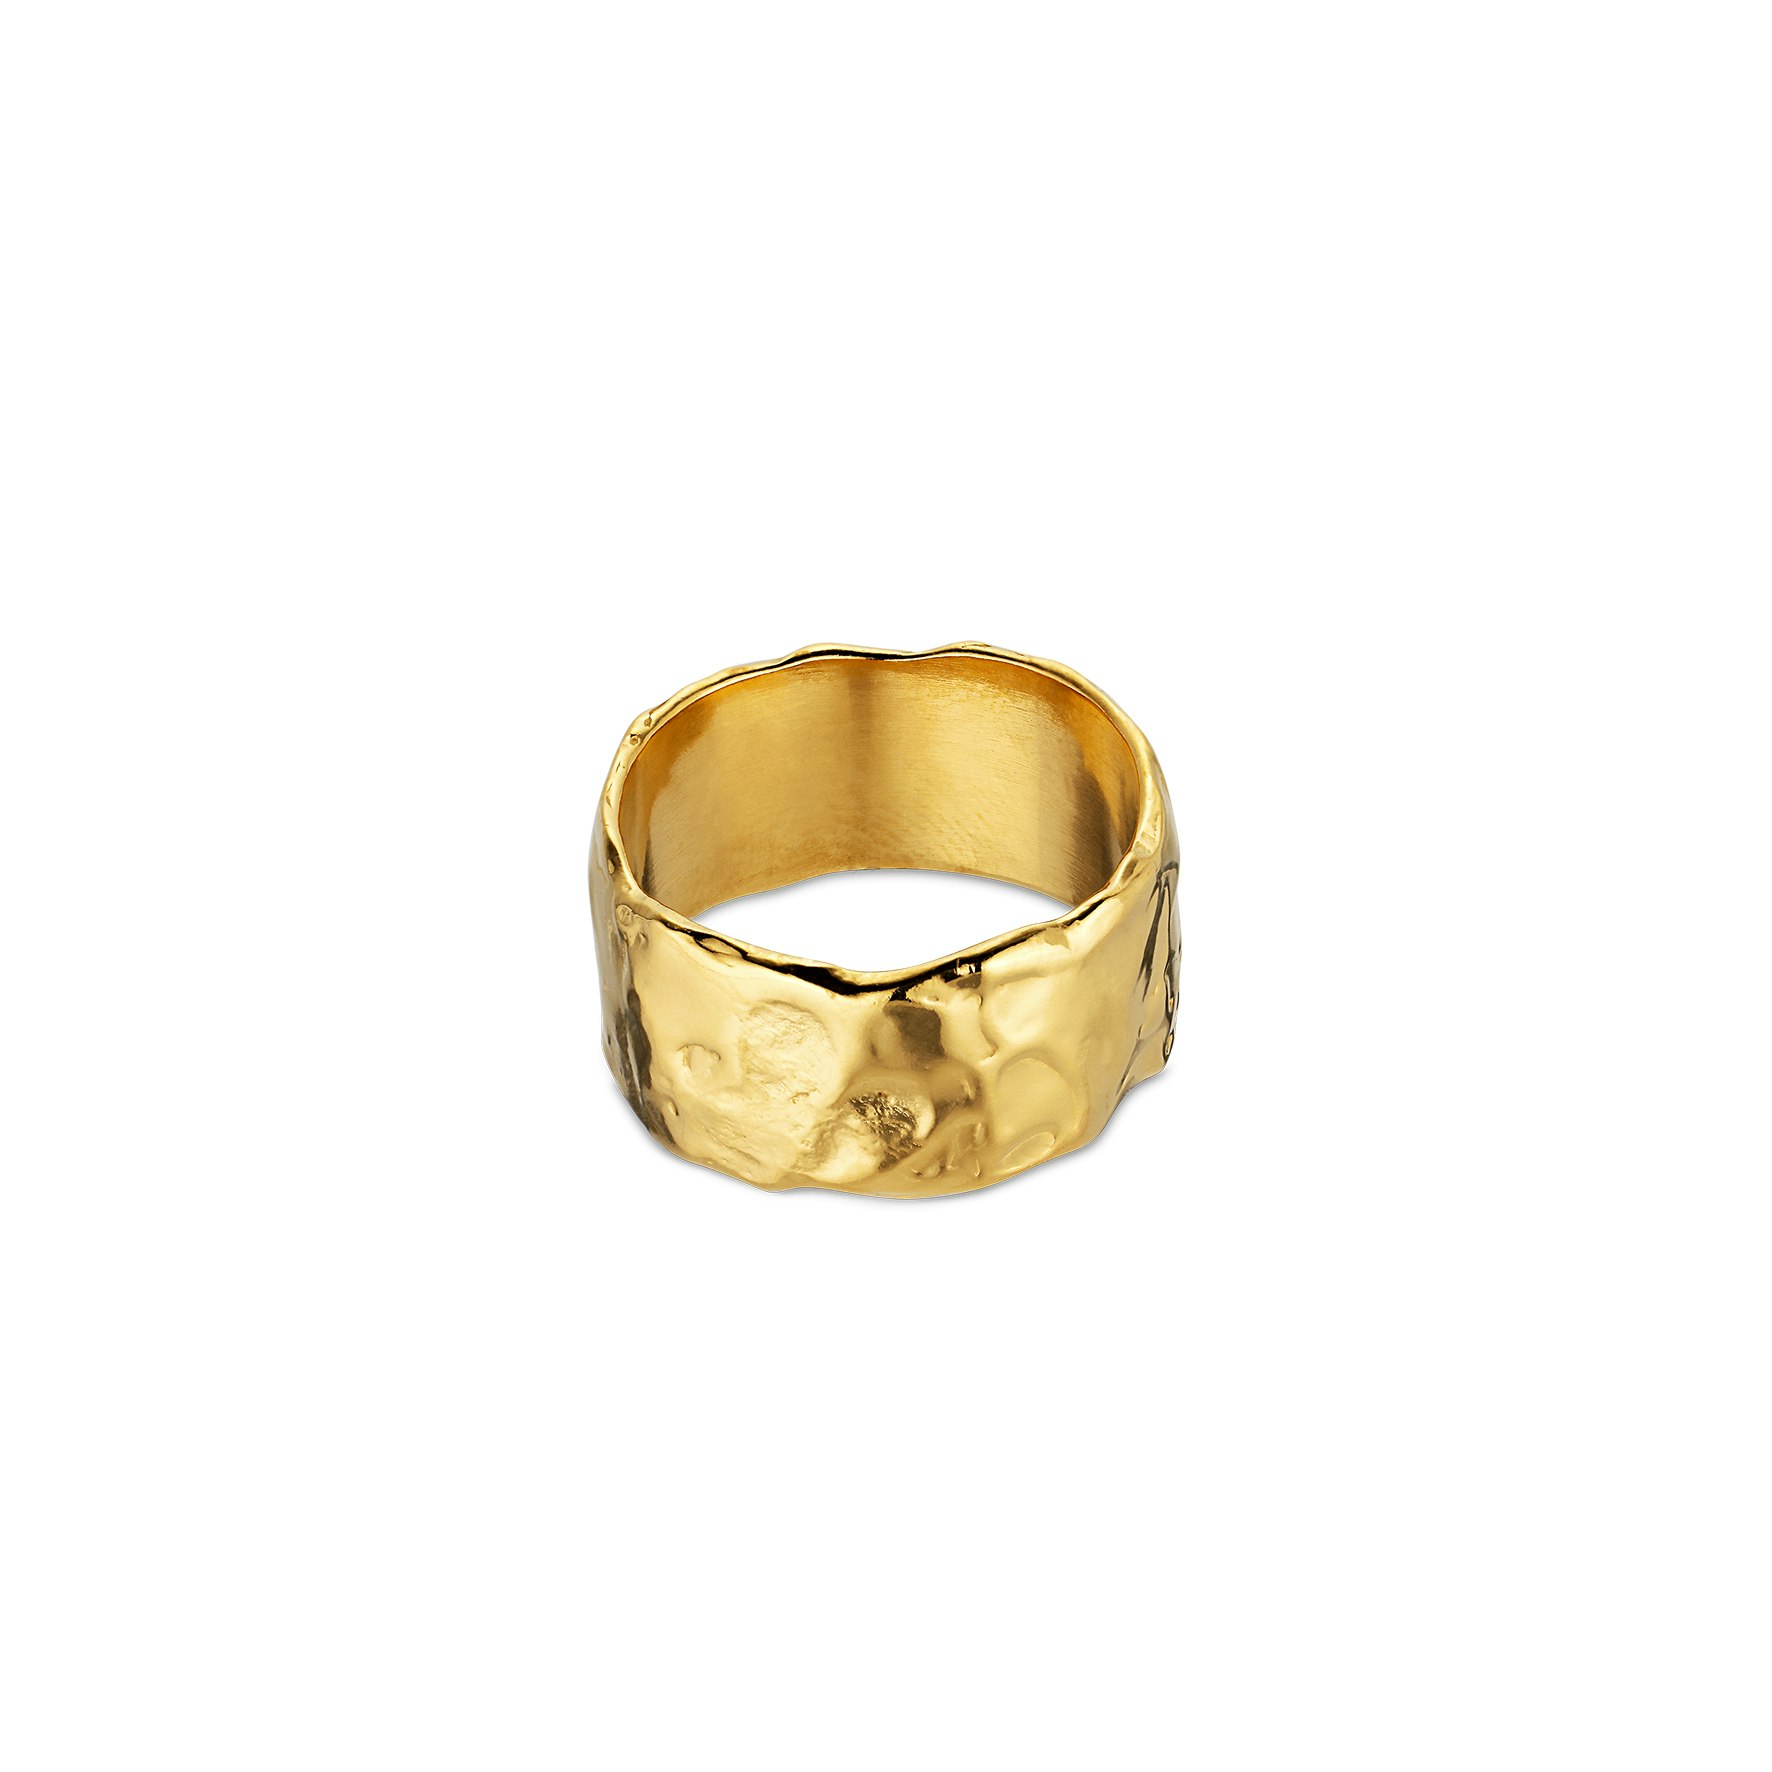 Bruised Heart Ring from Jane Kønig in Goldplated-Silver Sterling 925